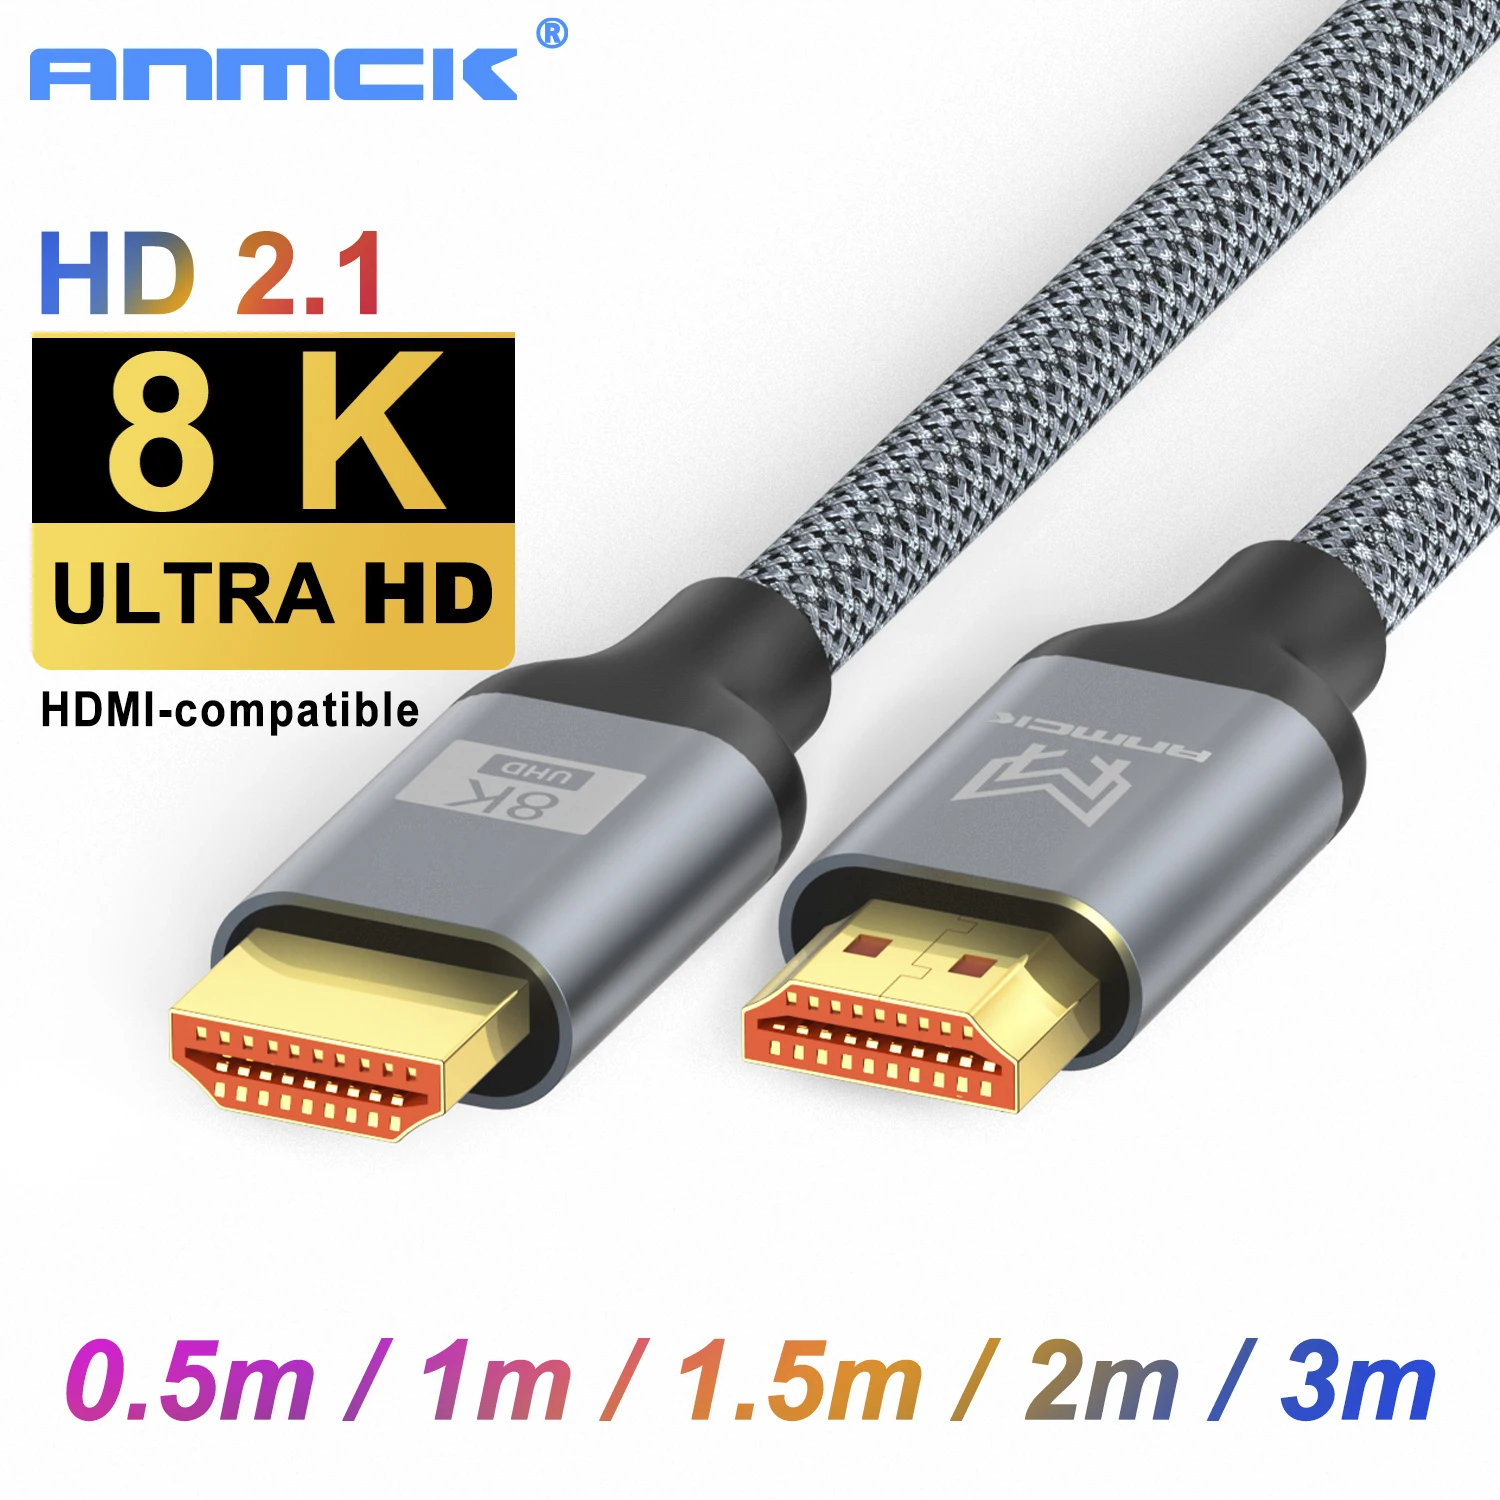 Anmck 8K HDMI-compatible Cable 2.1V Ultra HD Video Audio Wire For TV Box PS4 PS5 Projector Laptops Digital Cord Cables 4K